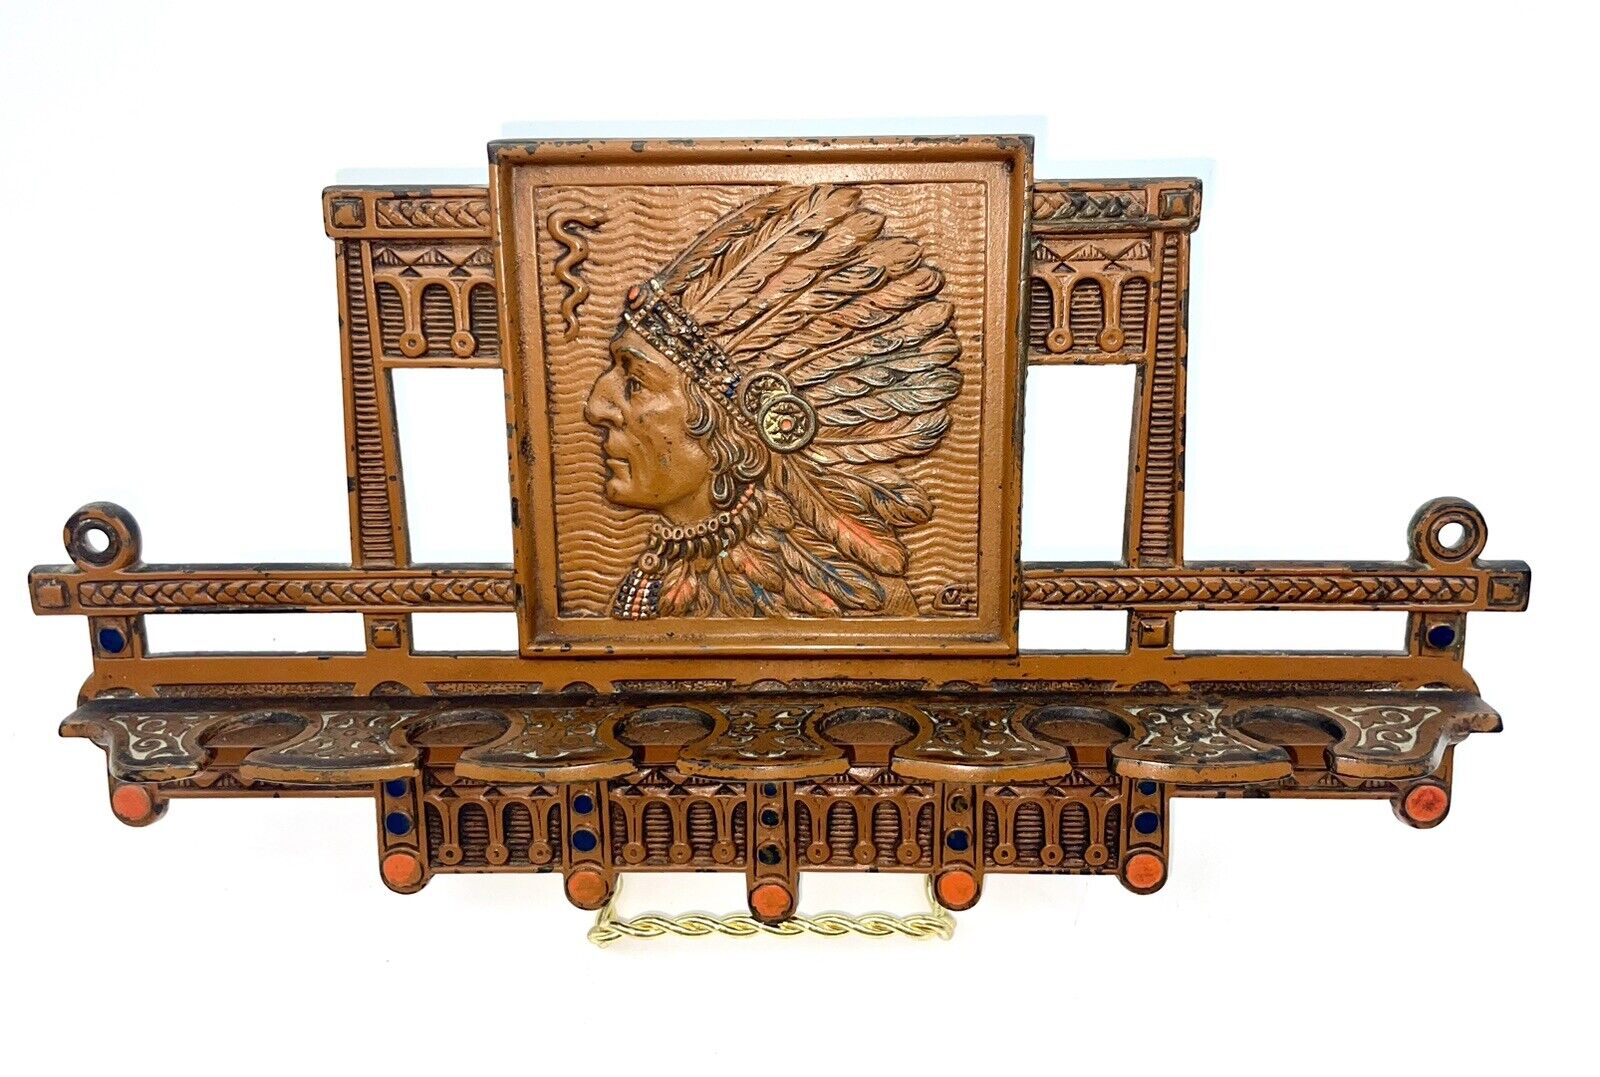 1910 JUDD NATIVE AMERICAN INDIAN CHIEF TOBACCO PIPE RACK HOLDER CAST IRON #2819